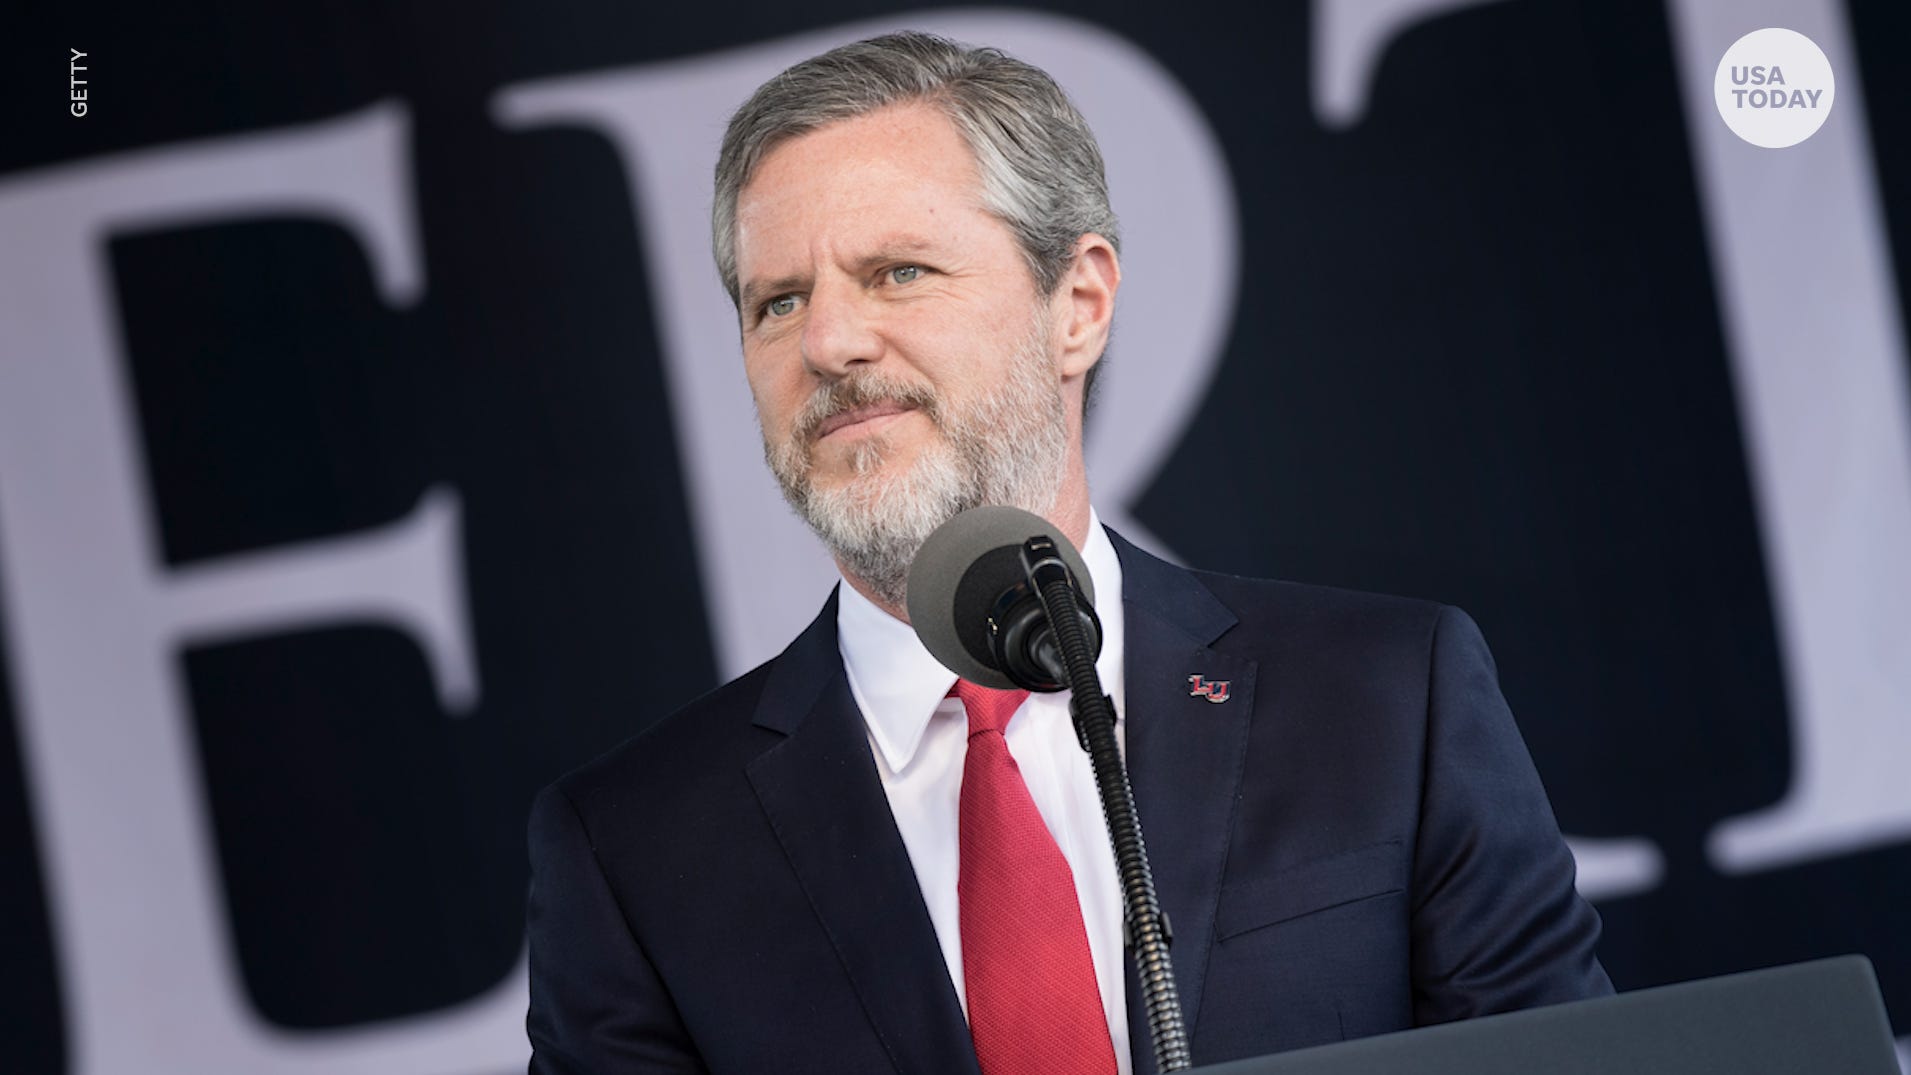 Jerry Falwell Jr. and Liberty University What we know